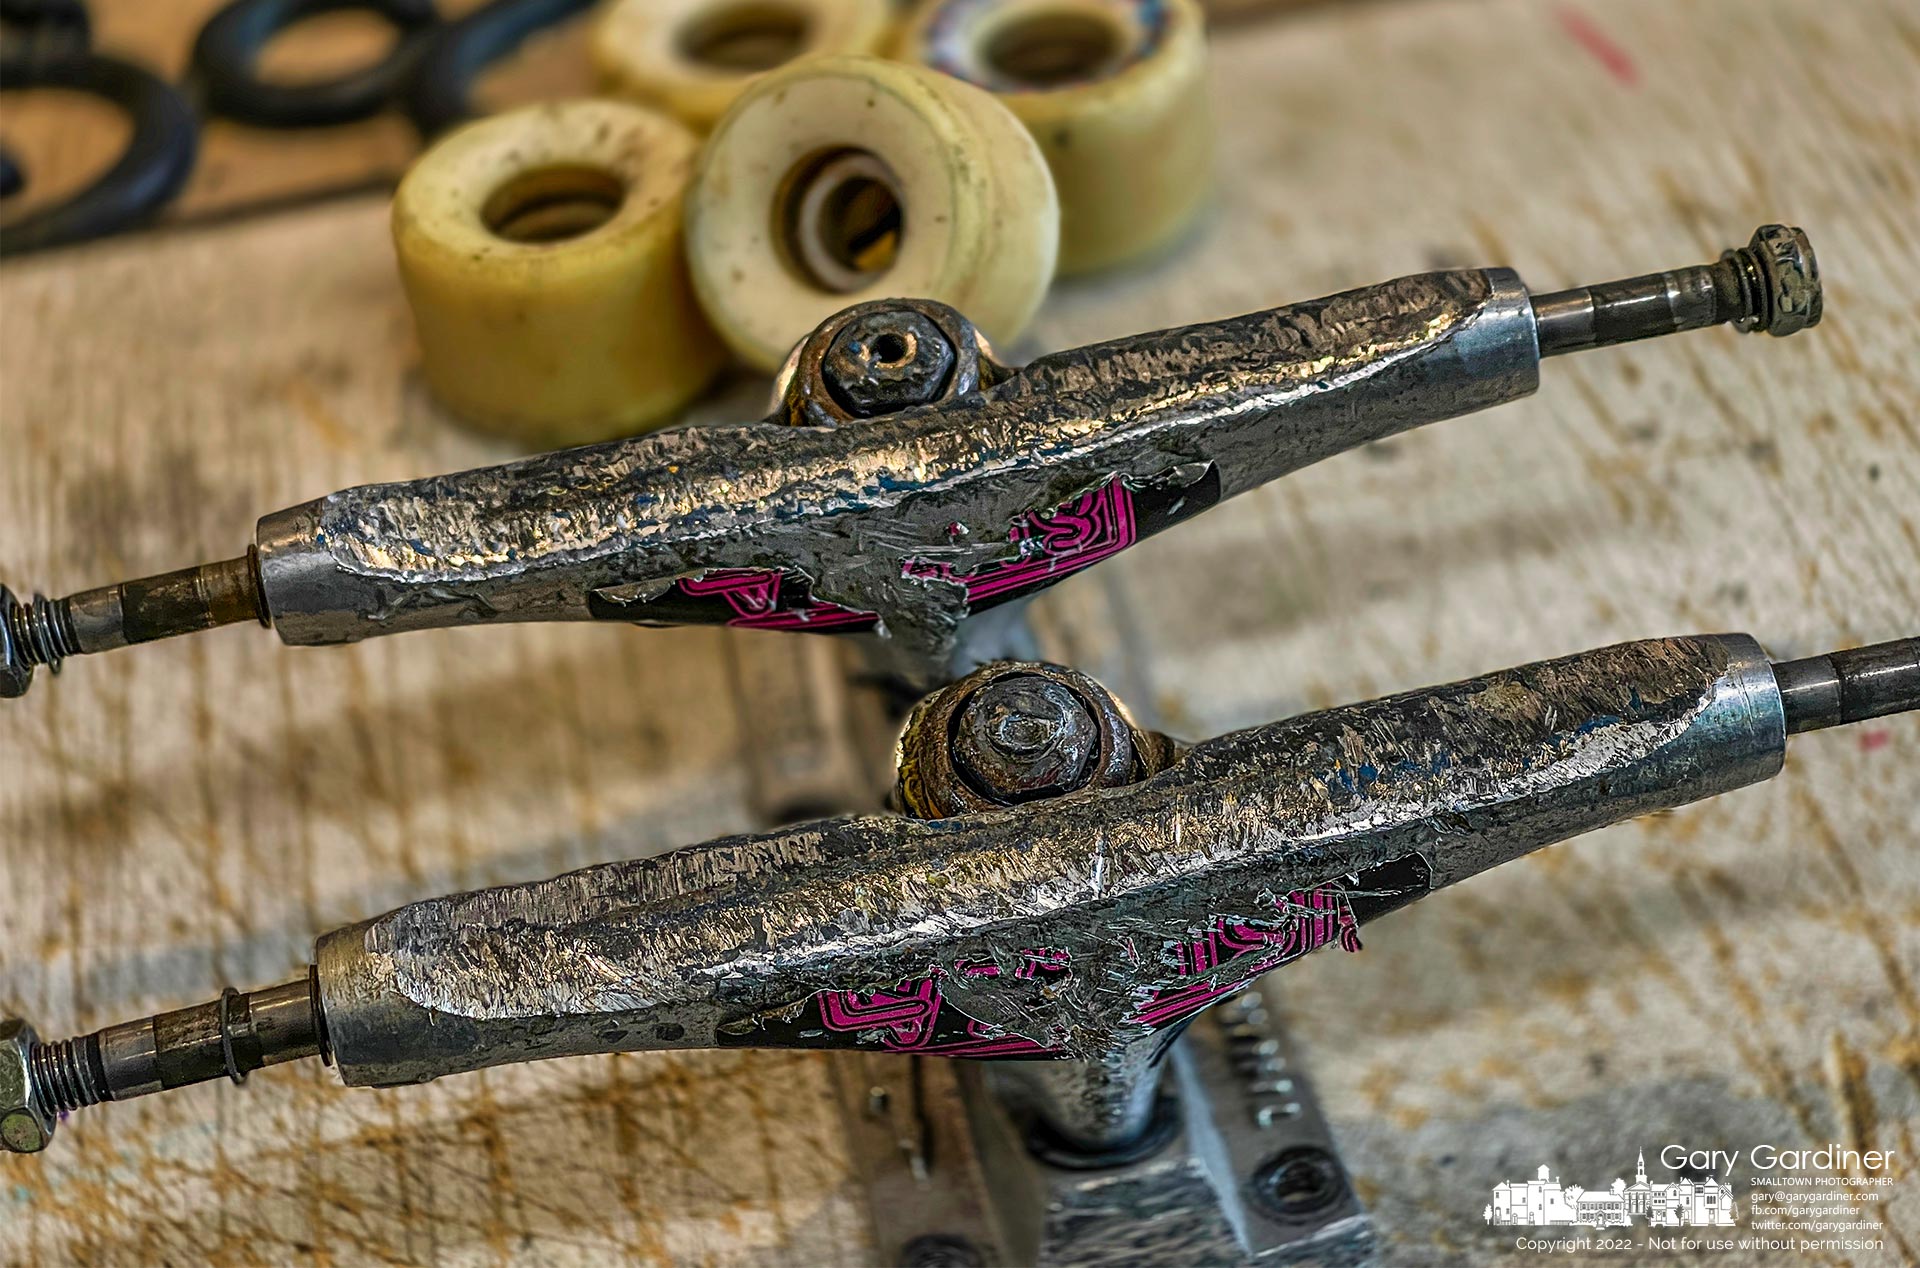 A set of worn-out skateboard trucks and wheels sit on the counter at Old Skool Skateboard where they are headed to recycling after they were removed and replaced with new equipment. My Final Photo for Feb. 19, 2022.